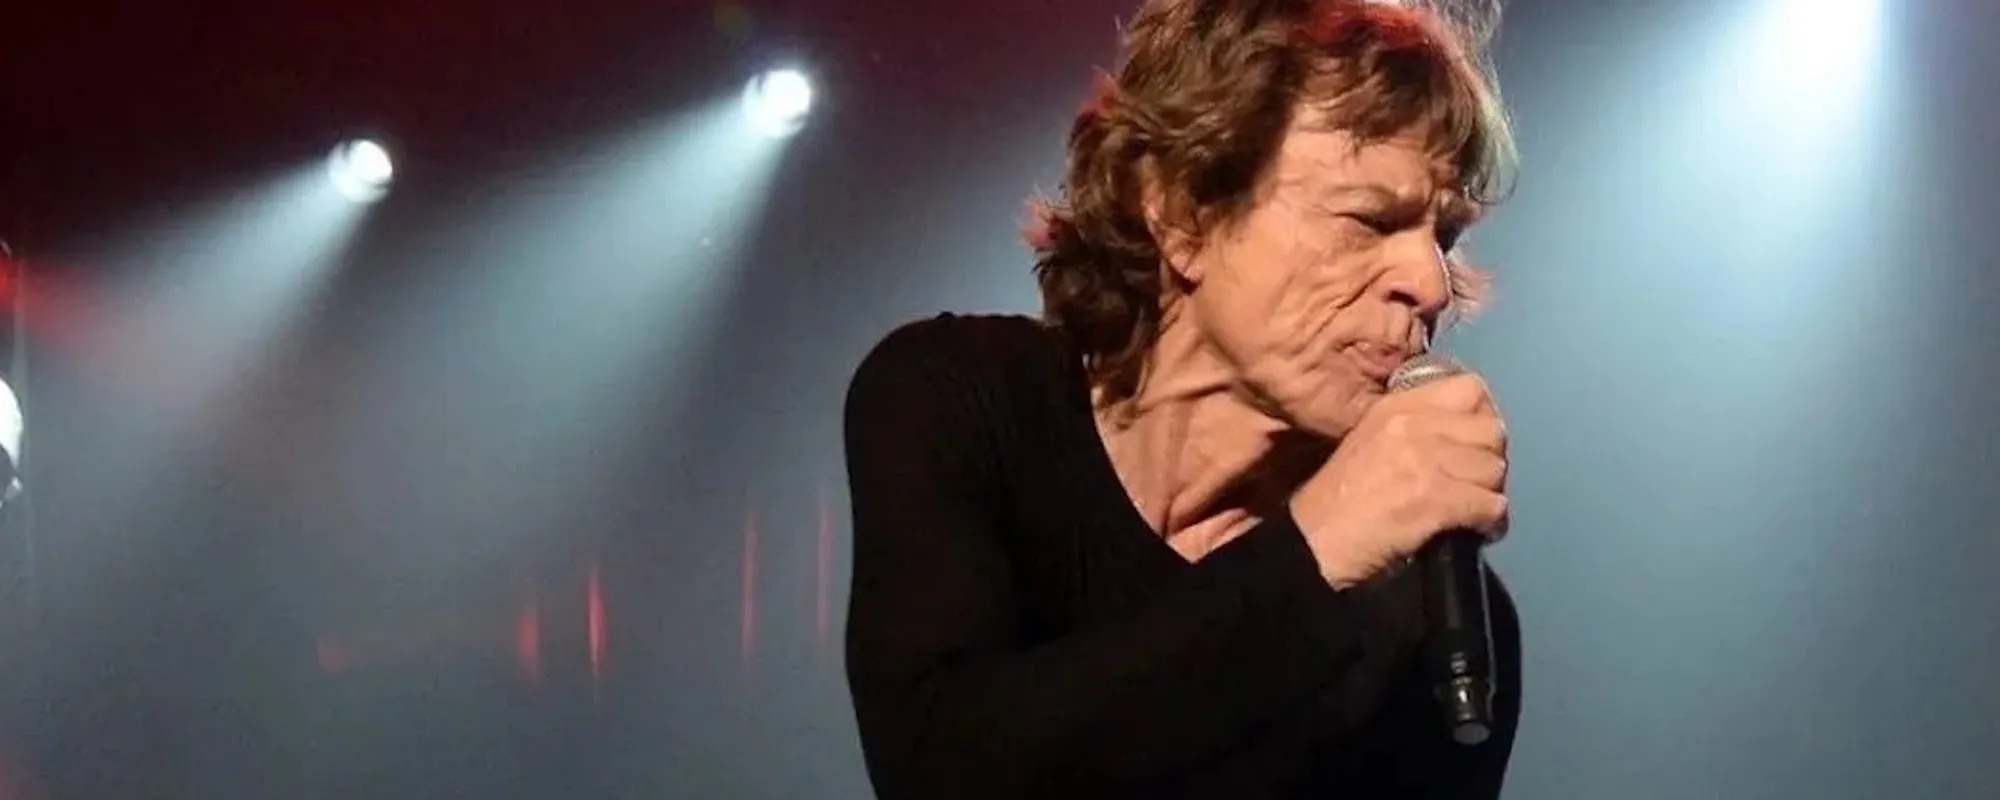 Mick Jagger Says He’s Ready To Resume Touring After Recovering From COVID-19